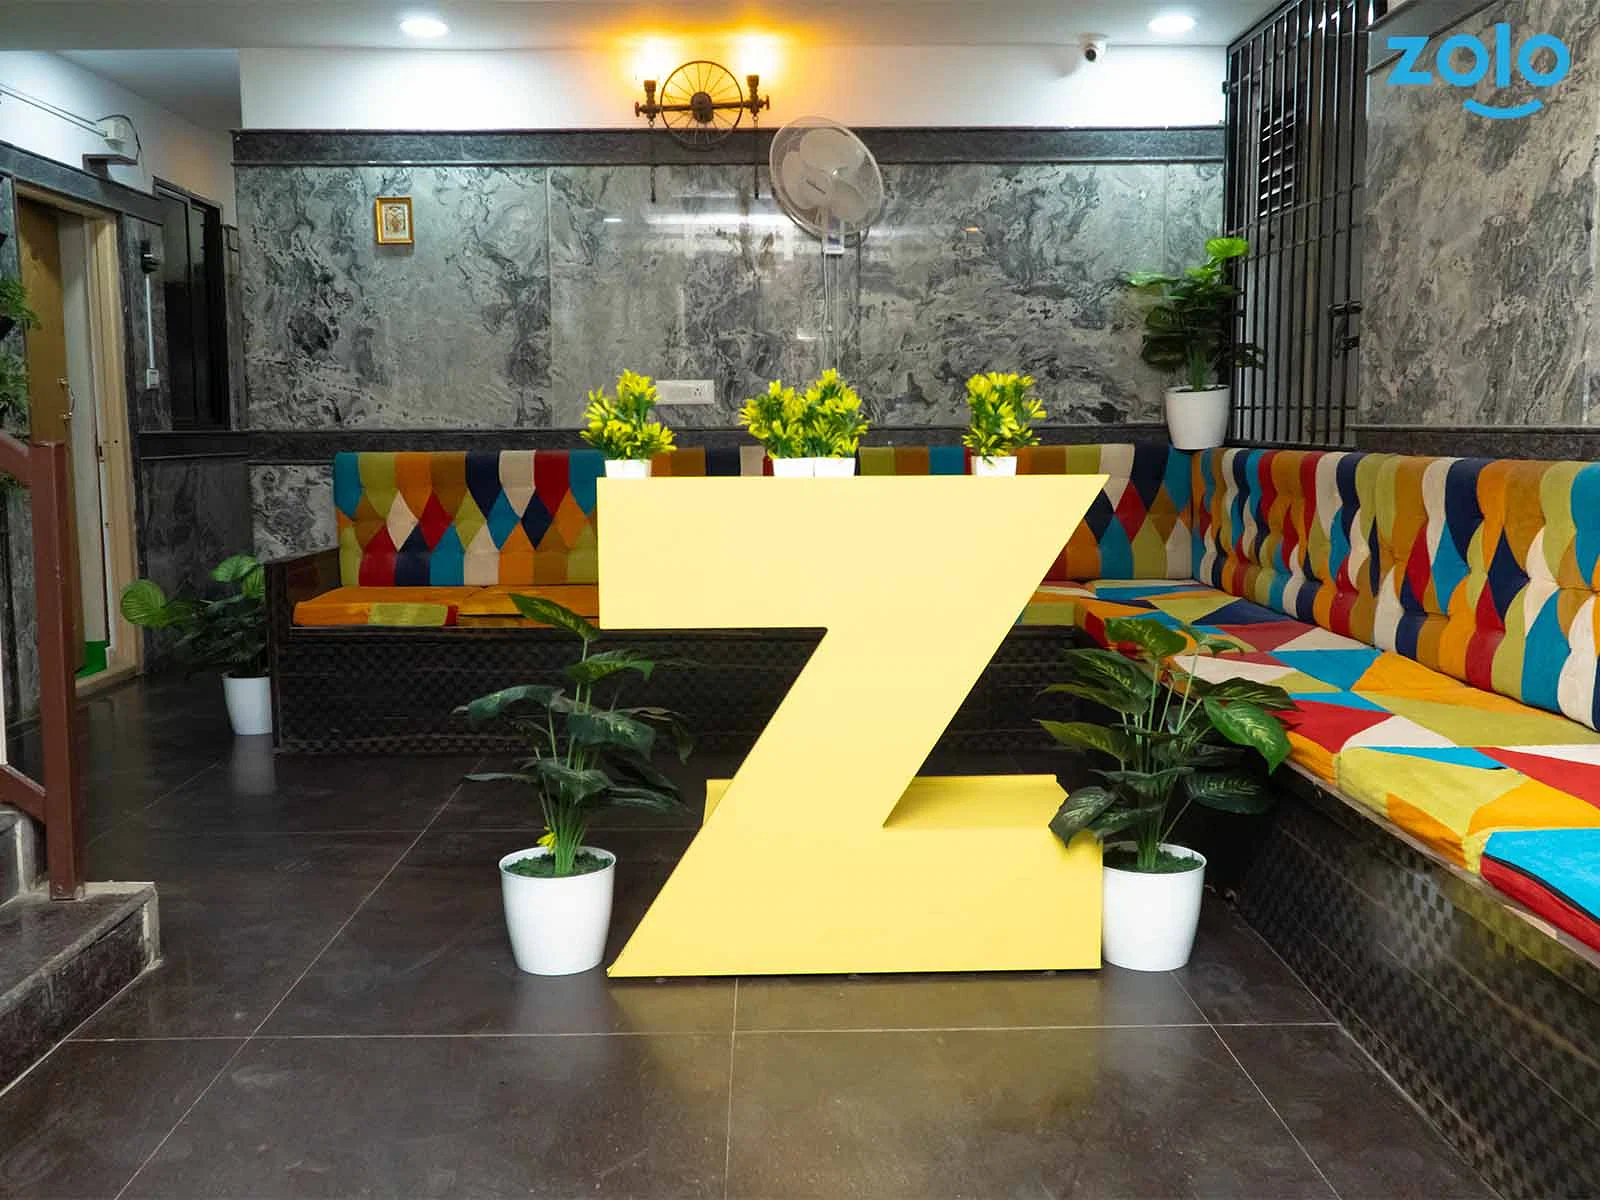 luxury PG accommodations with modern Wi-Fi, AC, and TV in Electronic City Phase 2-Bangalore-Zolo Highstreet F